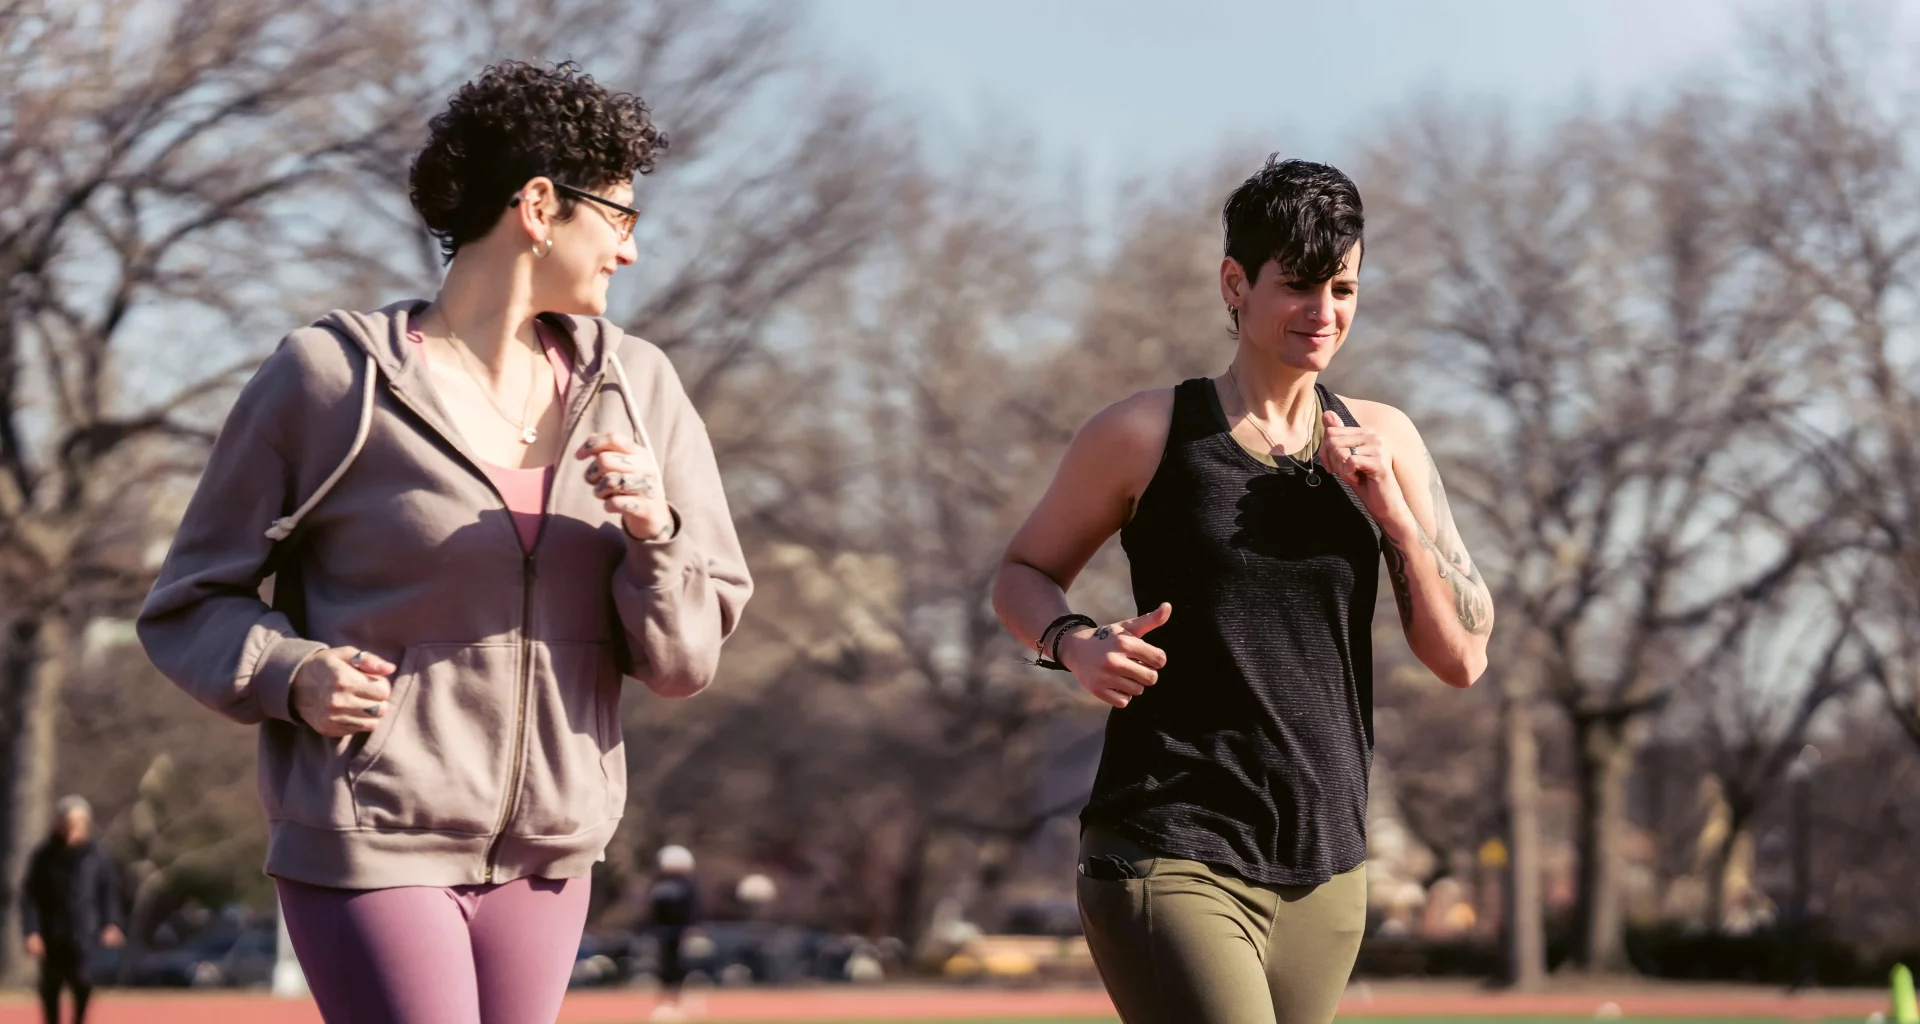 Two ladies jogging in a sunny day.